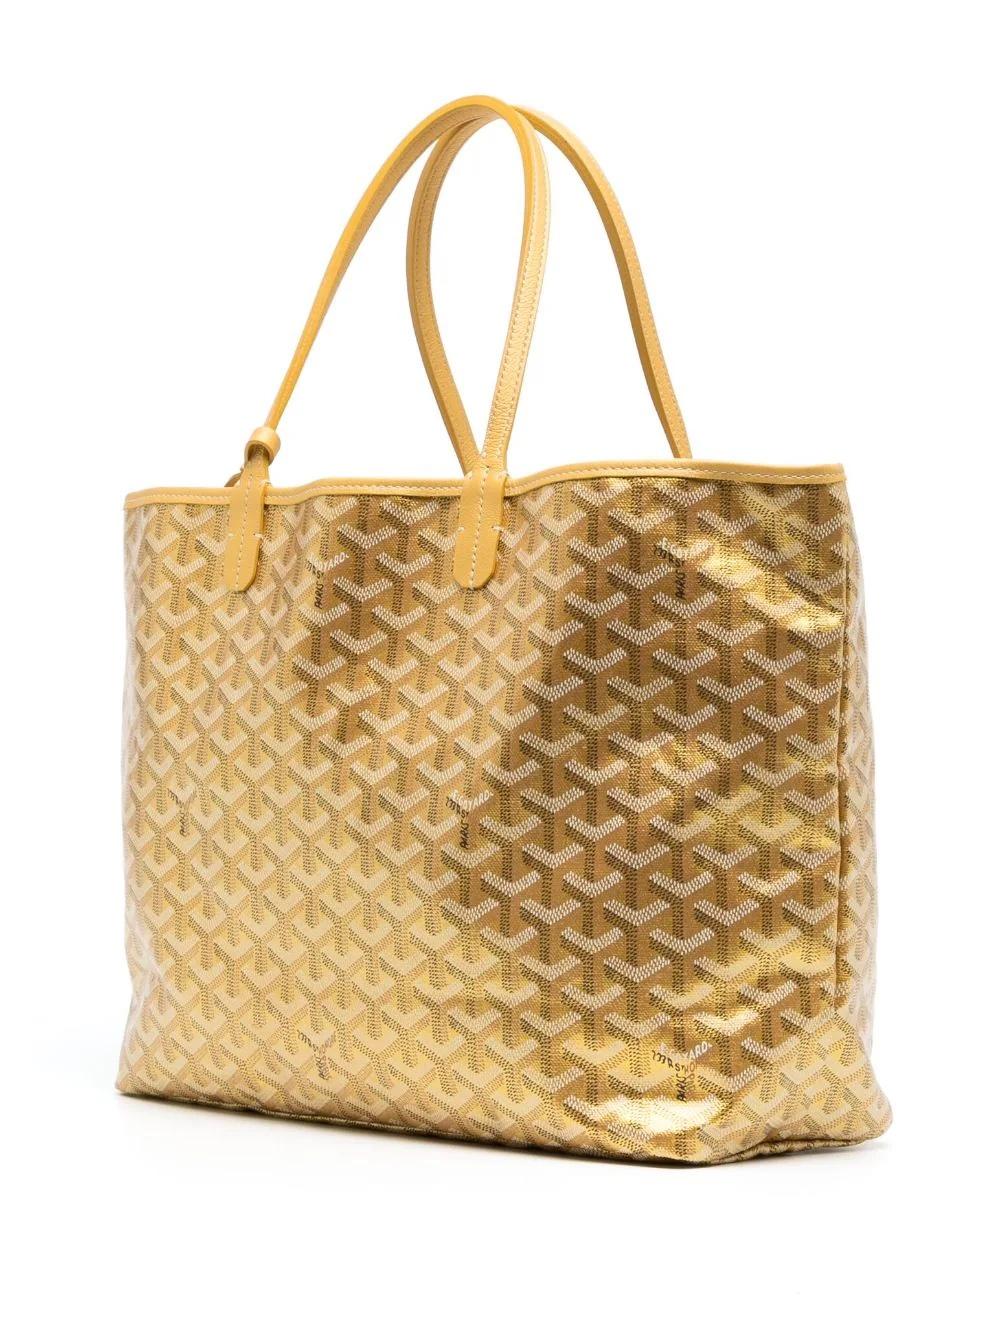 * Gold-tone
* Canvas
* Signature Goyardine pattern
* Butterfly print crafted by our in-house artist
* Two long top handles
* Open top
* Removable pouch
* Rectangle body - PM size
* From the limited edition metallic collection at Goyard
* Excellent